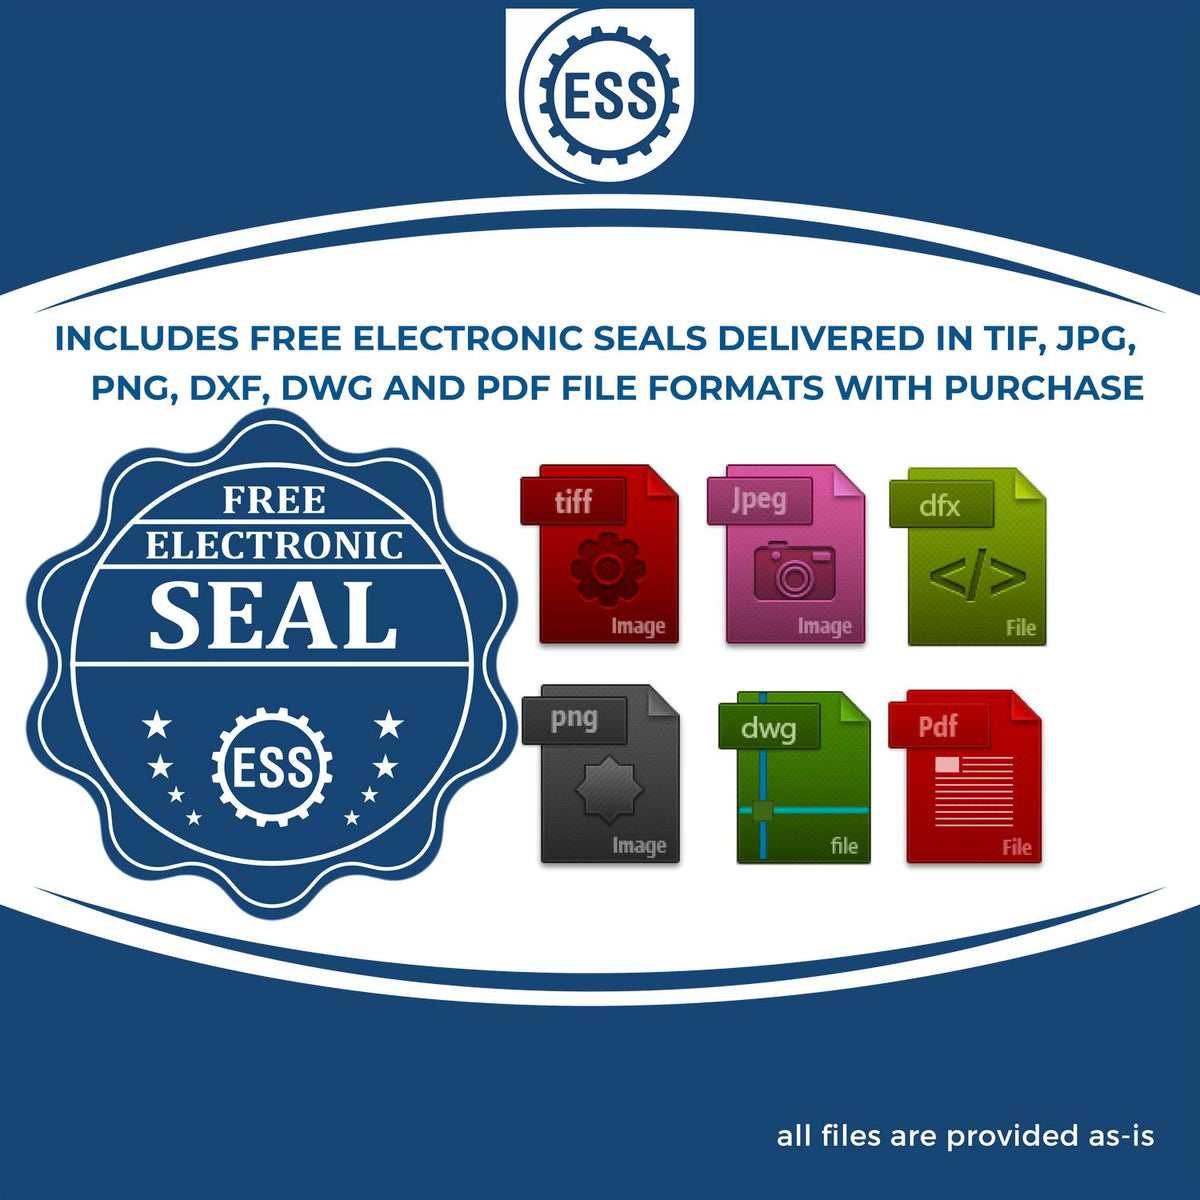 An infographic for the free electronic seal for the Premium MaxLight Pre-Inked Illinois Geology Stamp illustrating the different file type icons such as DXF, DWG, TIF, JPG and PNG.